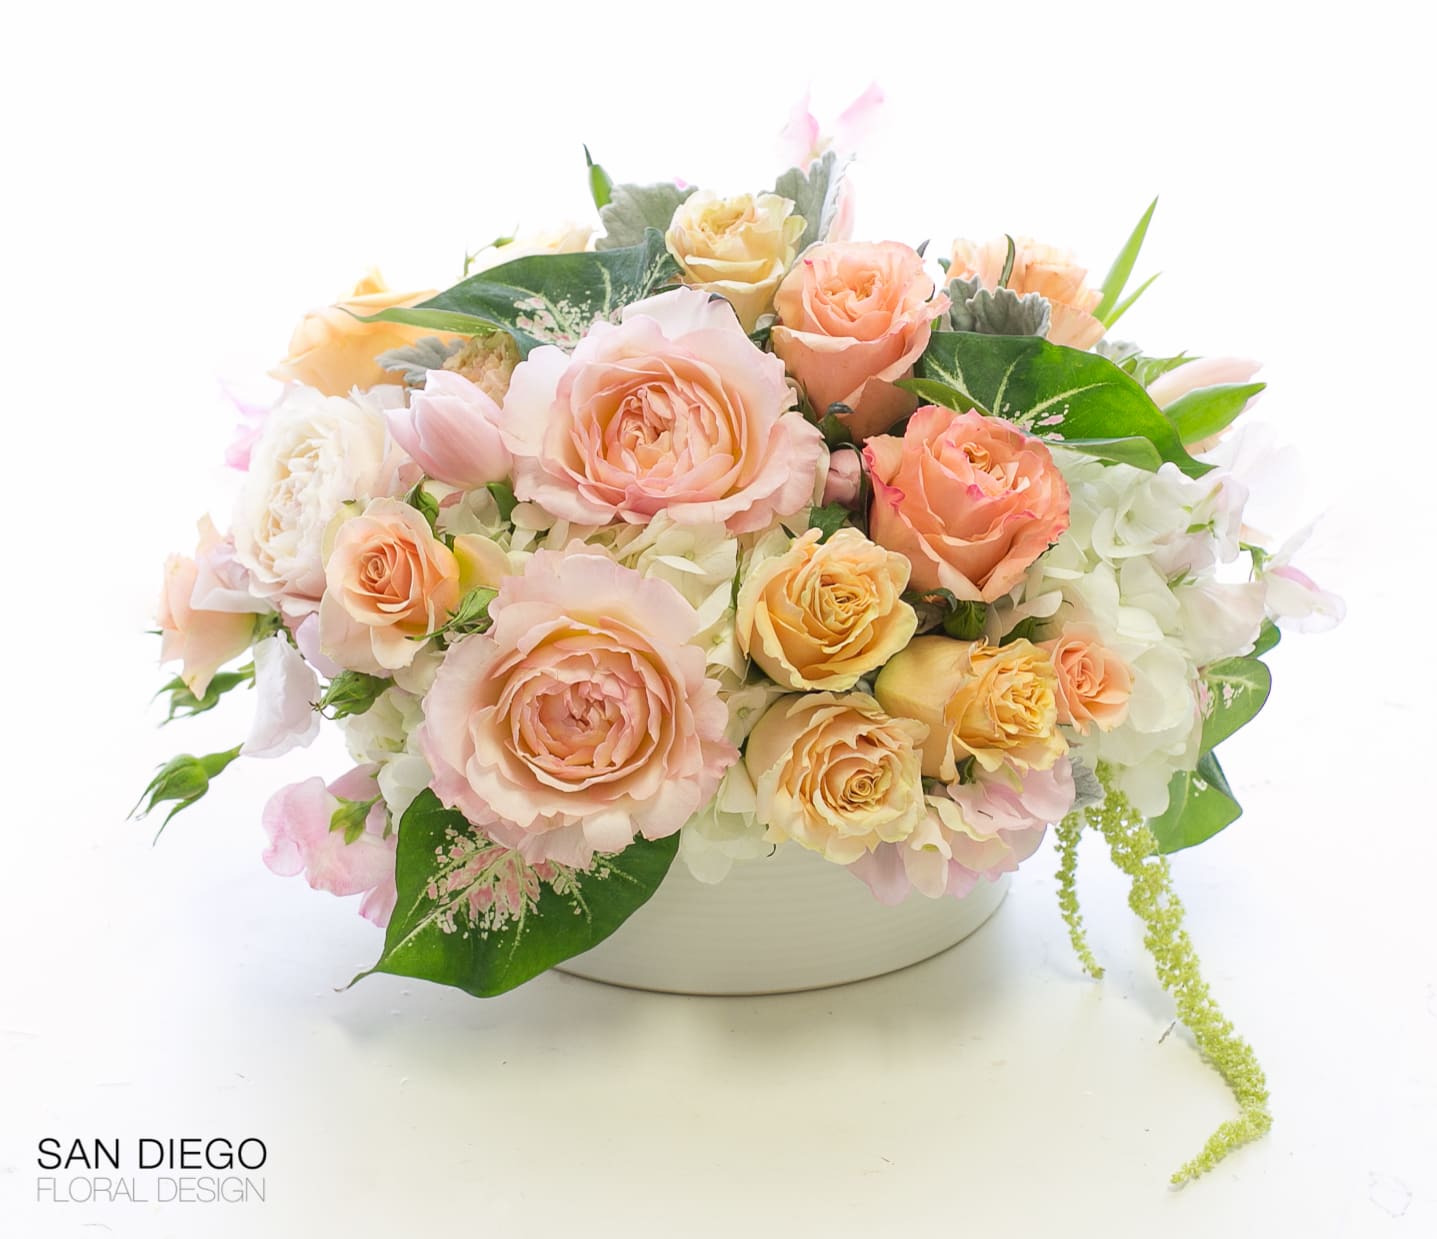 Elegance  - This arrangements is an explosion of elegance, a rich textural palette of soft pinks, blush and peach toned roses, garden roses, tulips. 